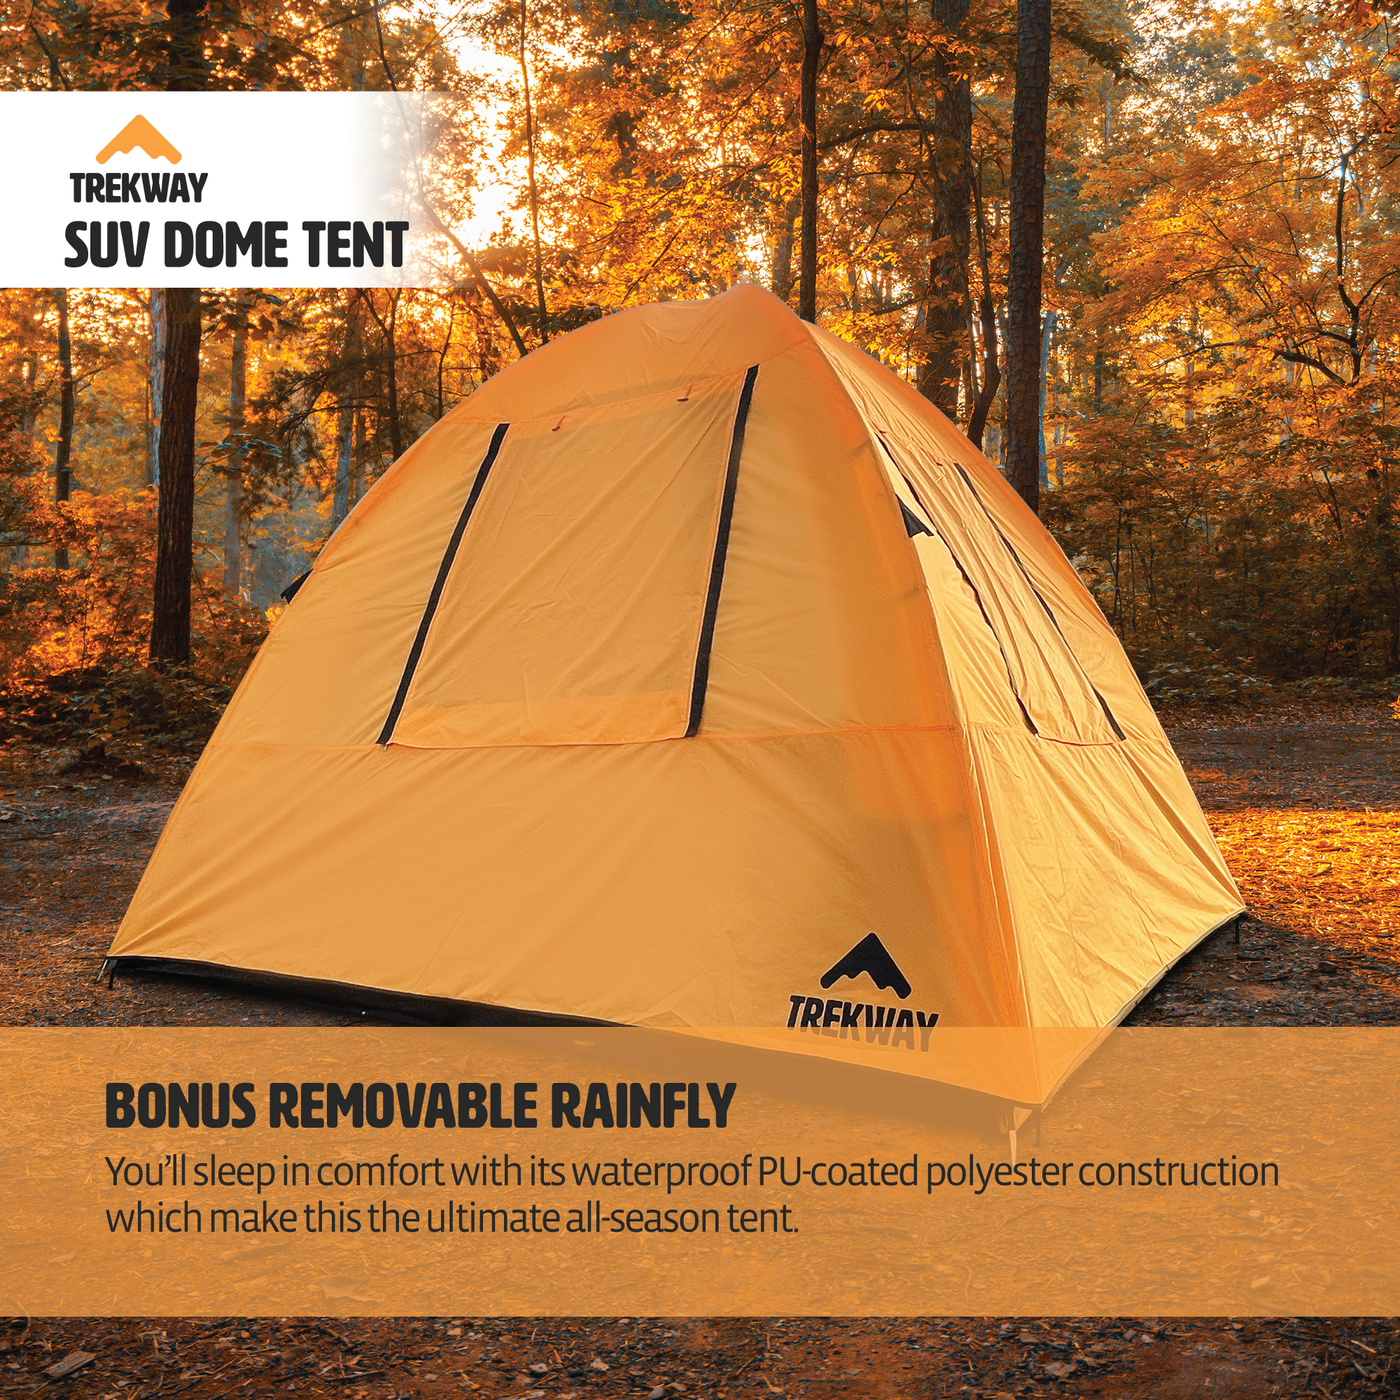 Trekway SUV Dome Tent